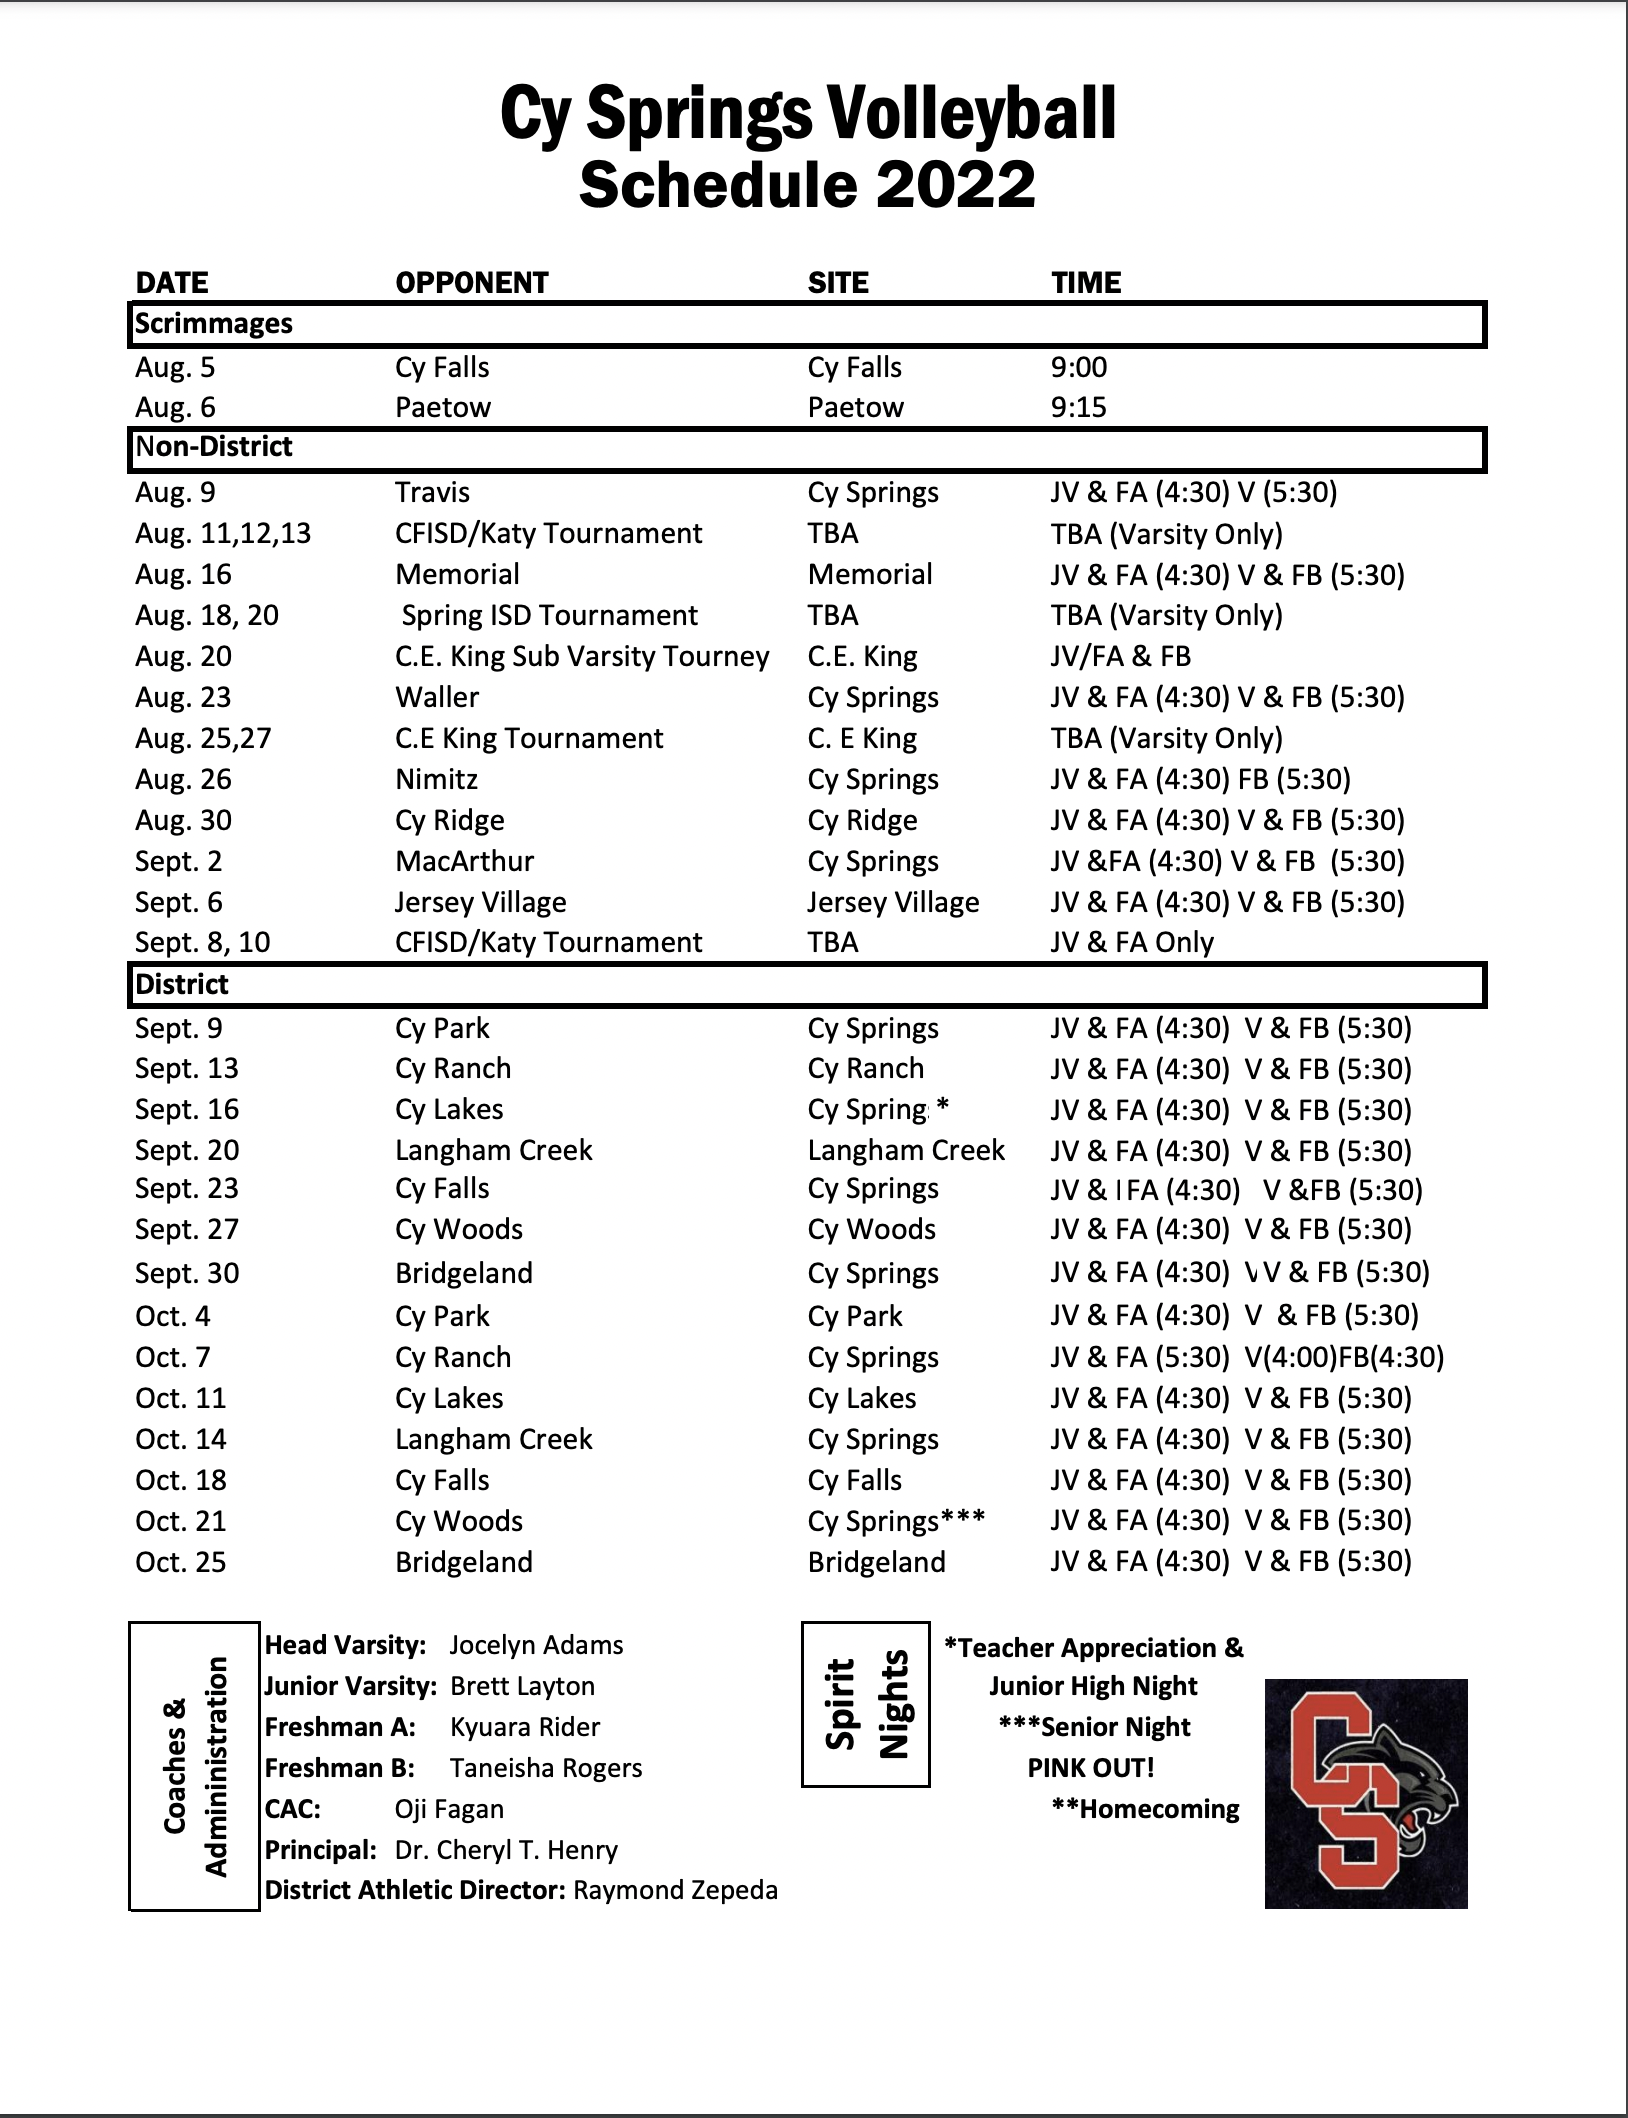 Cy Springs High School Volleyball Schedule